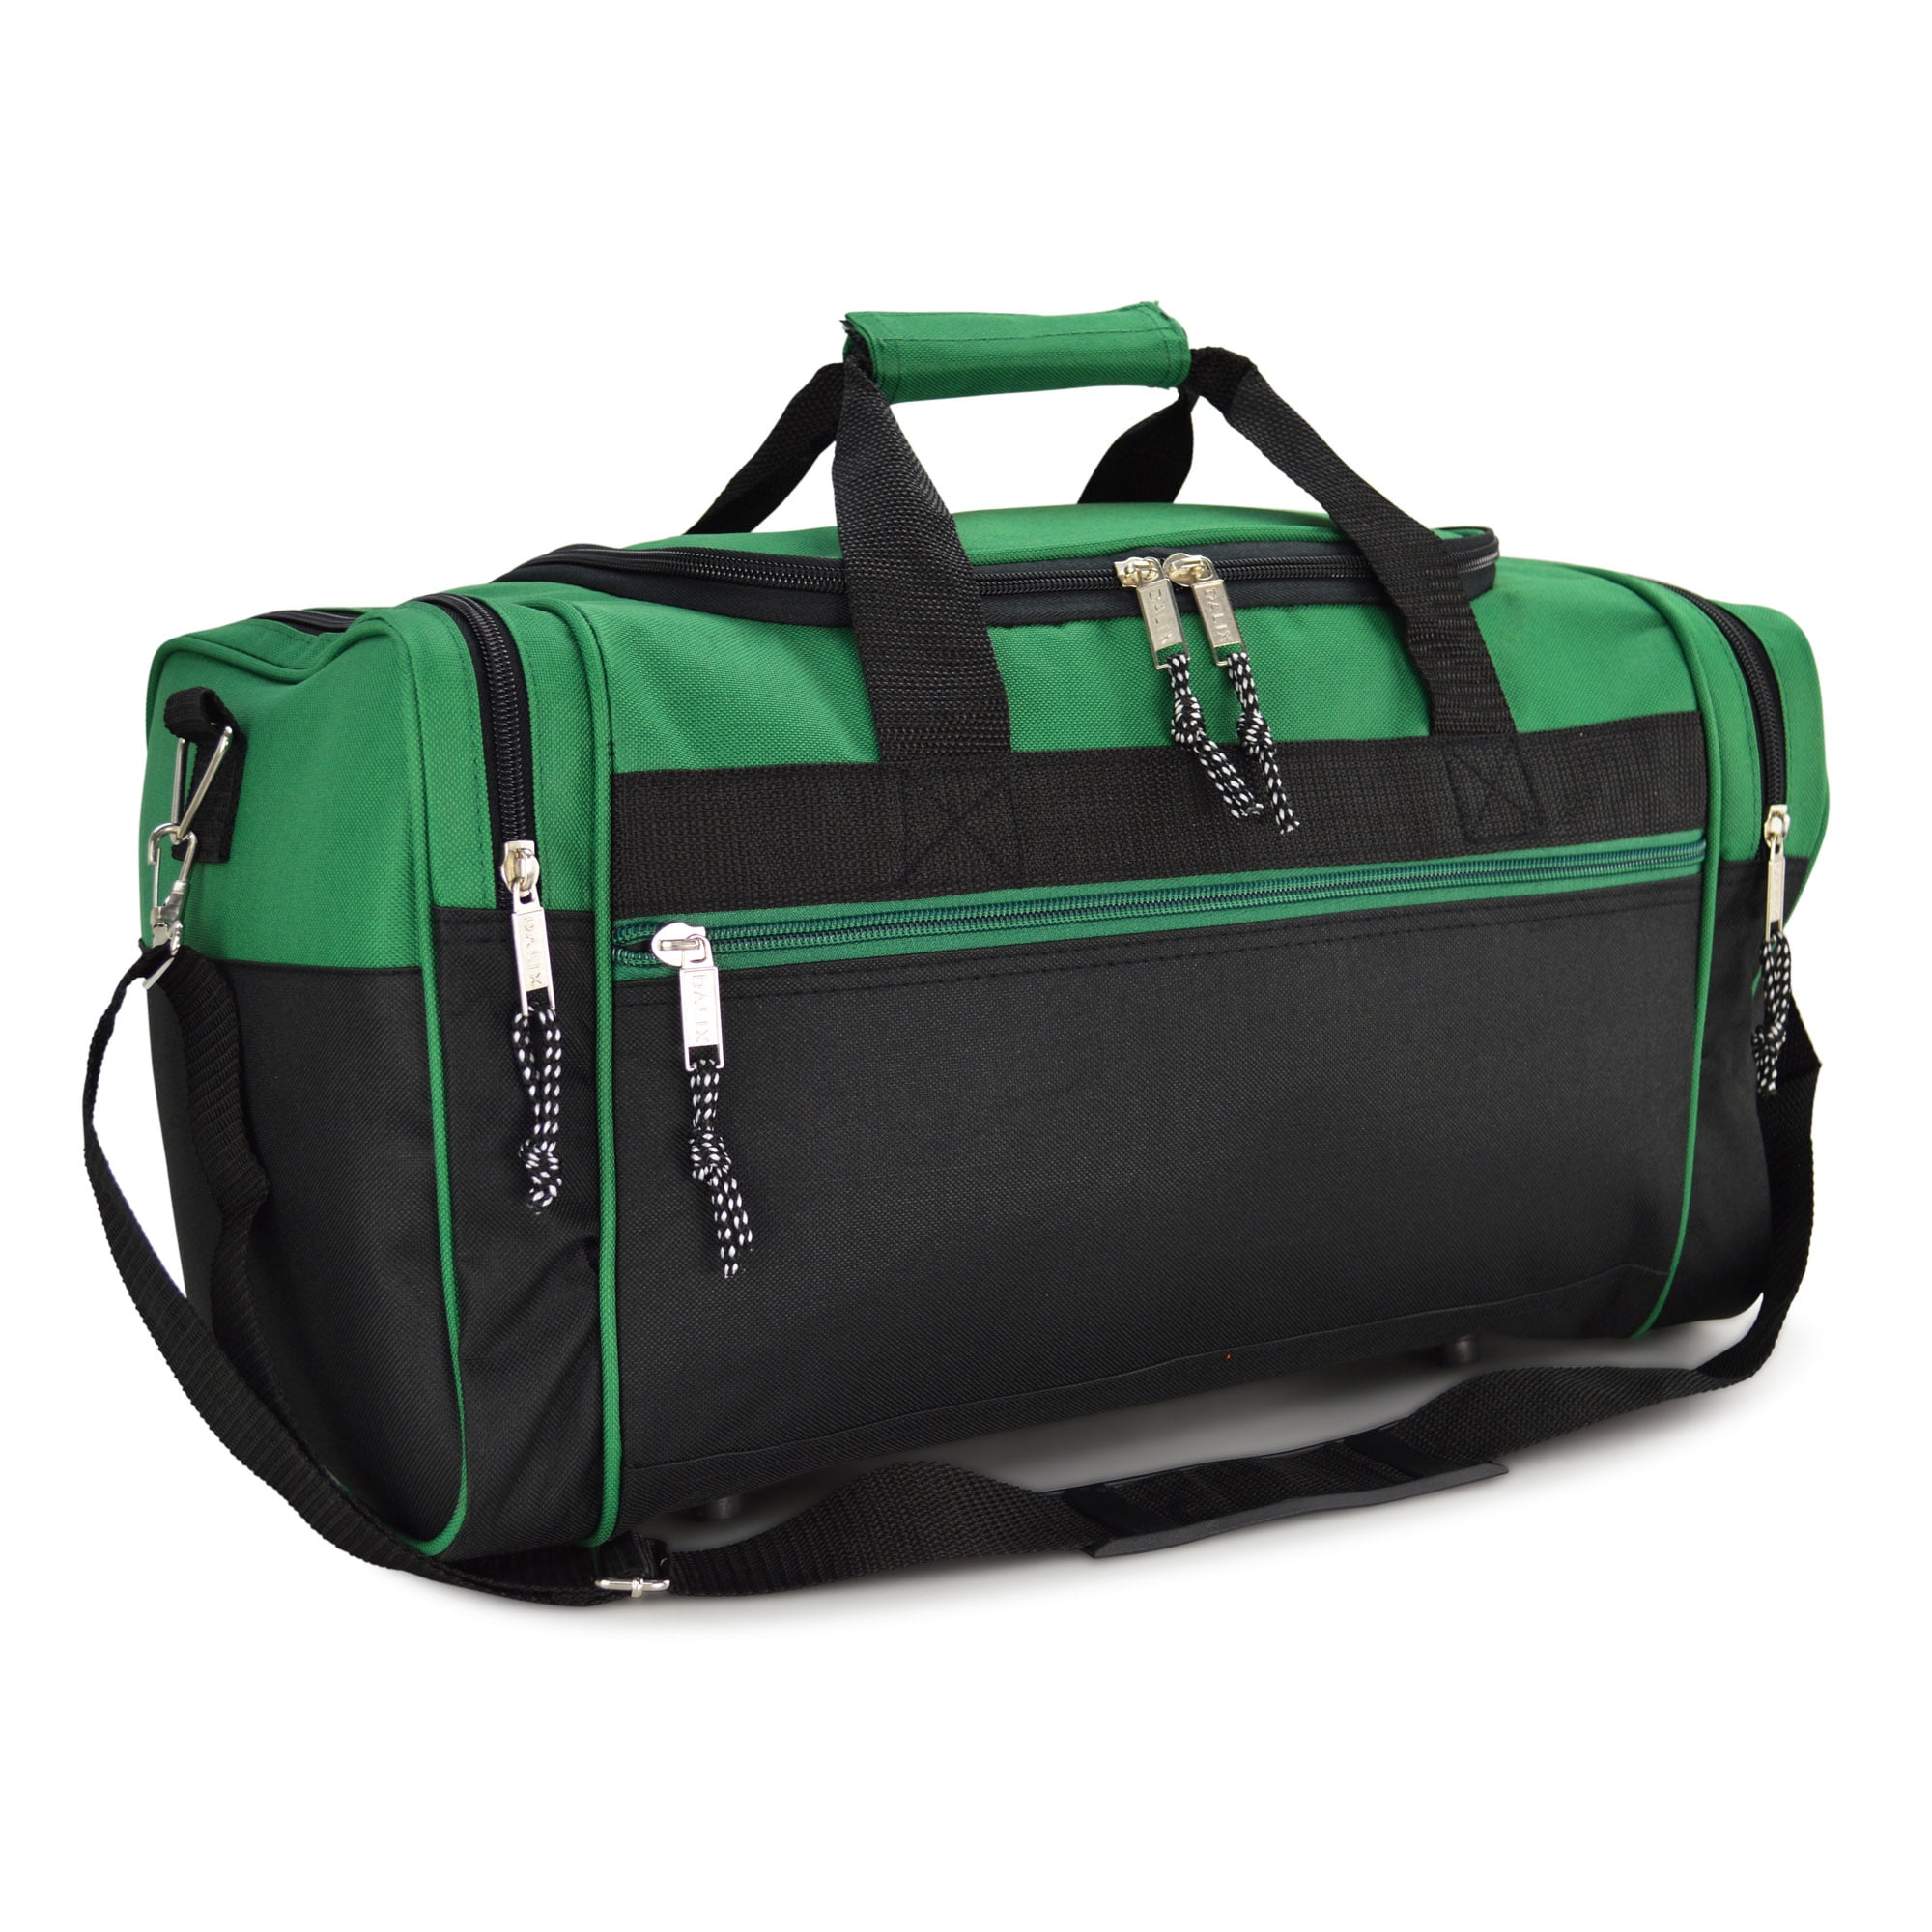 21 Blank Sports Duffle Bag Gym Bag Travel Duffel with Adjustable Strap in Green